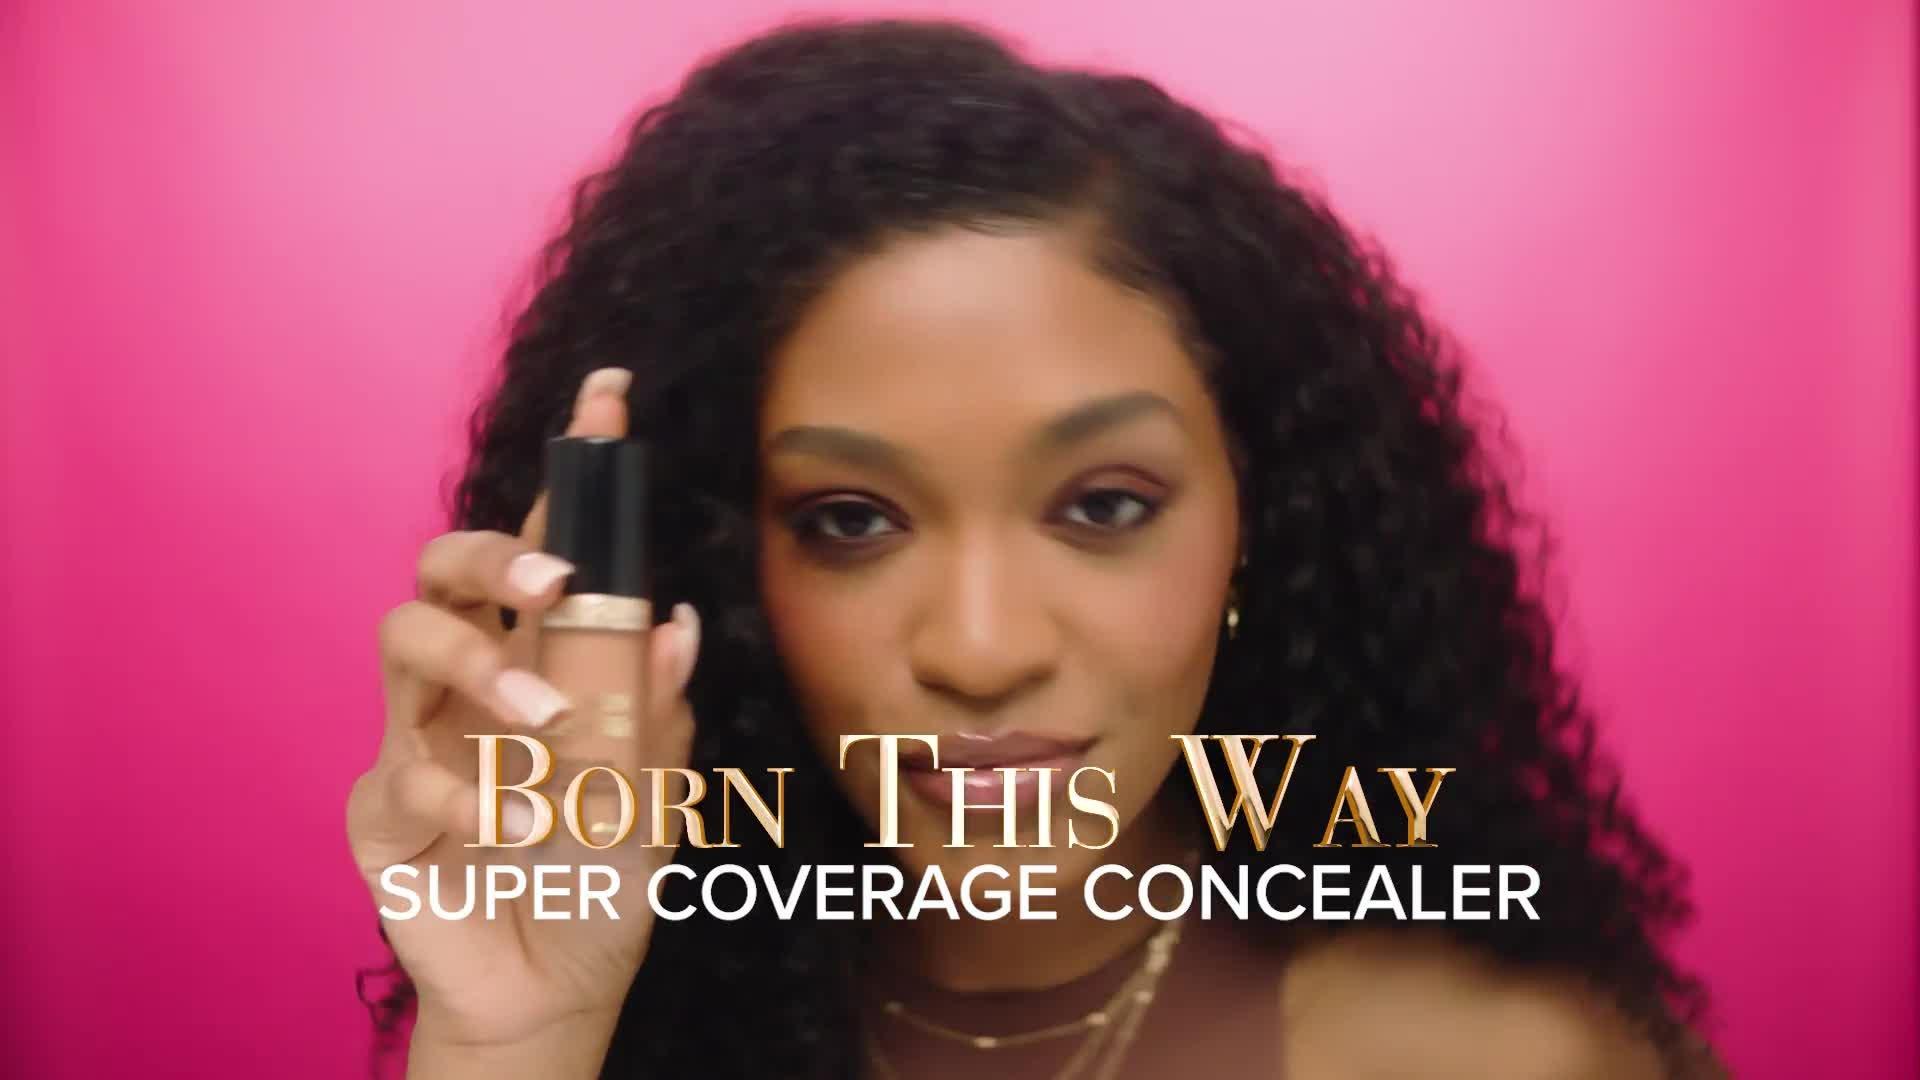 Too Faced, Born This Way Super Coverage Concealer